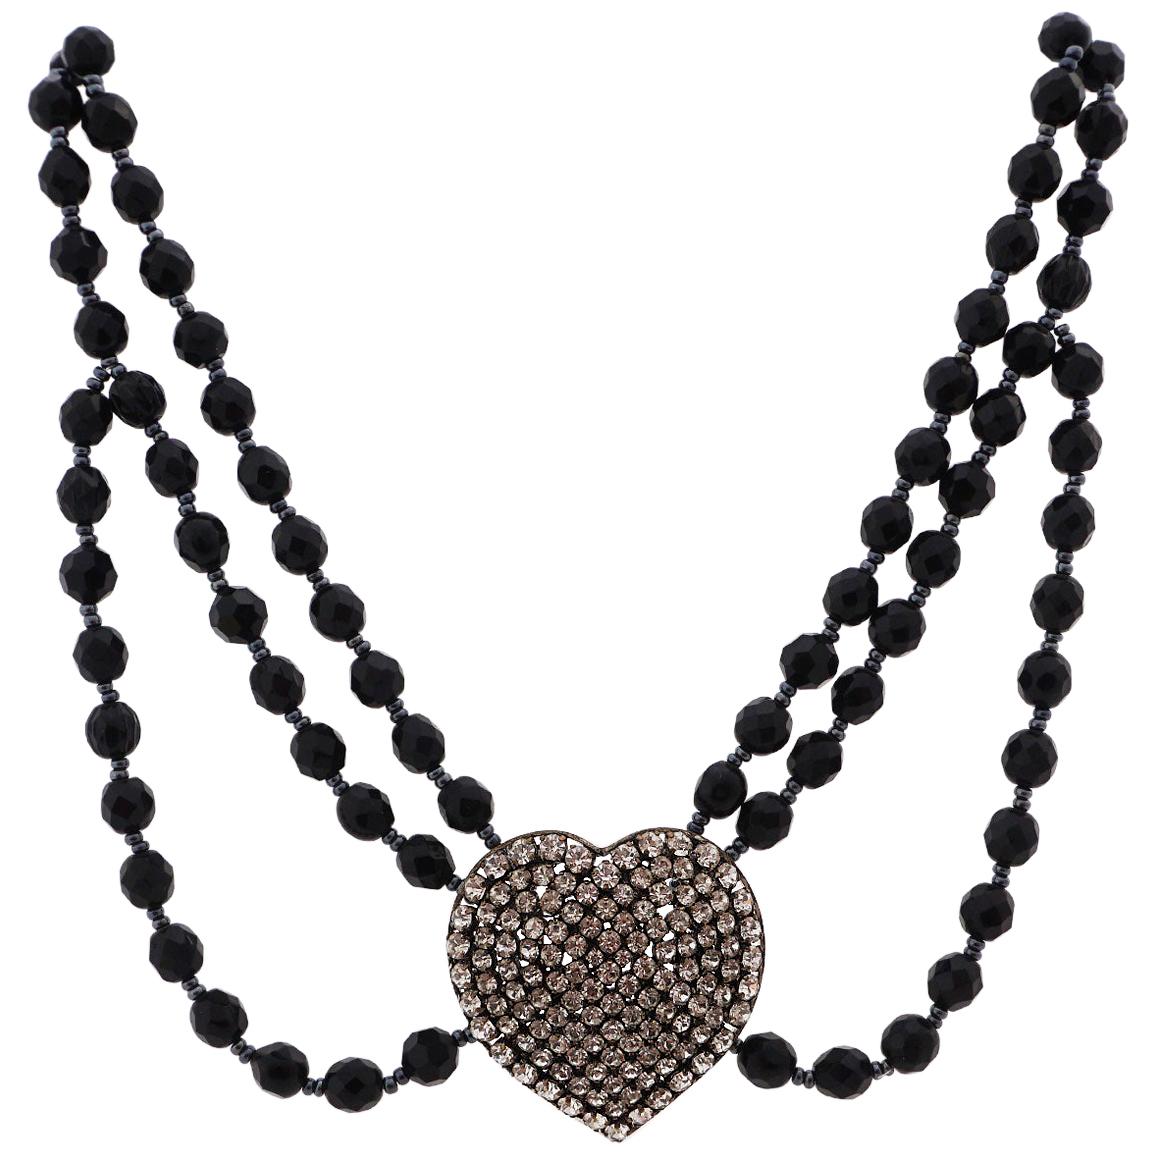 Necklace made of Gablonz glass beads with rhinestone heart